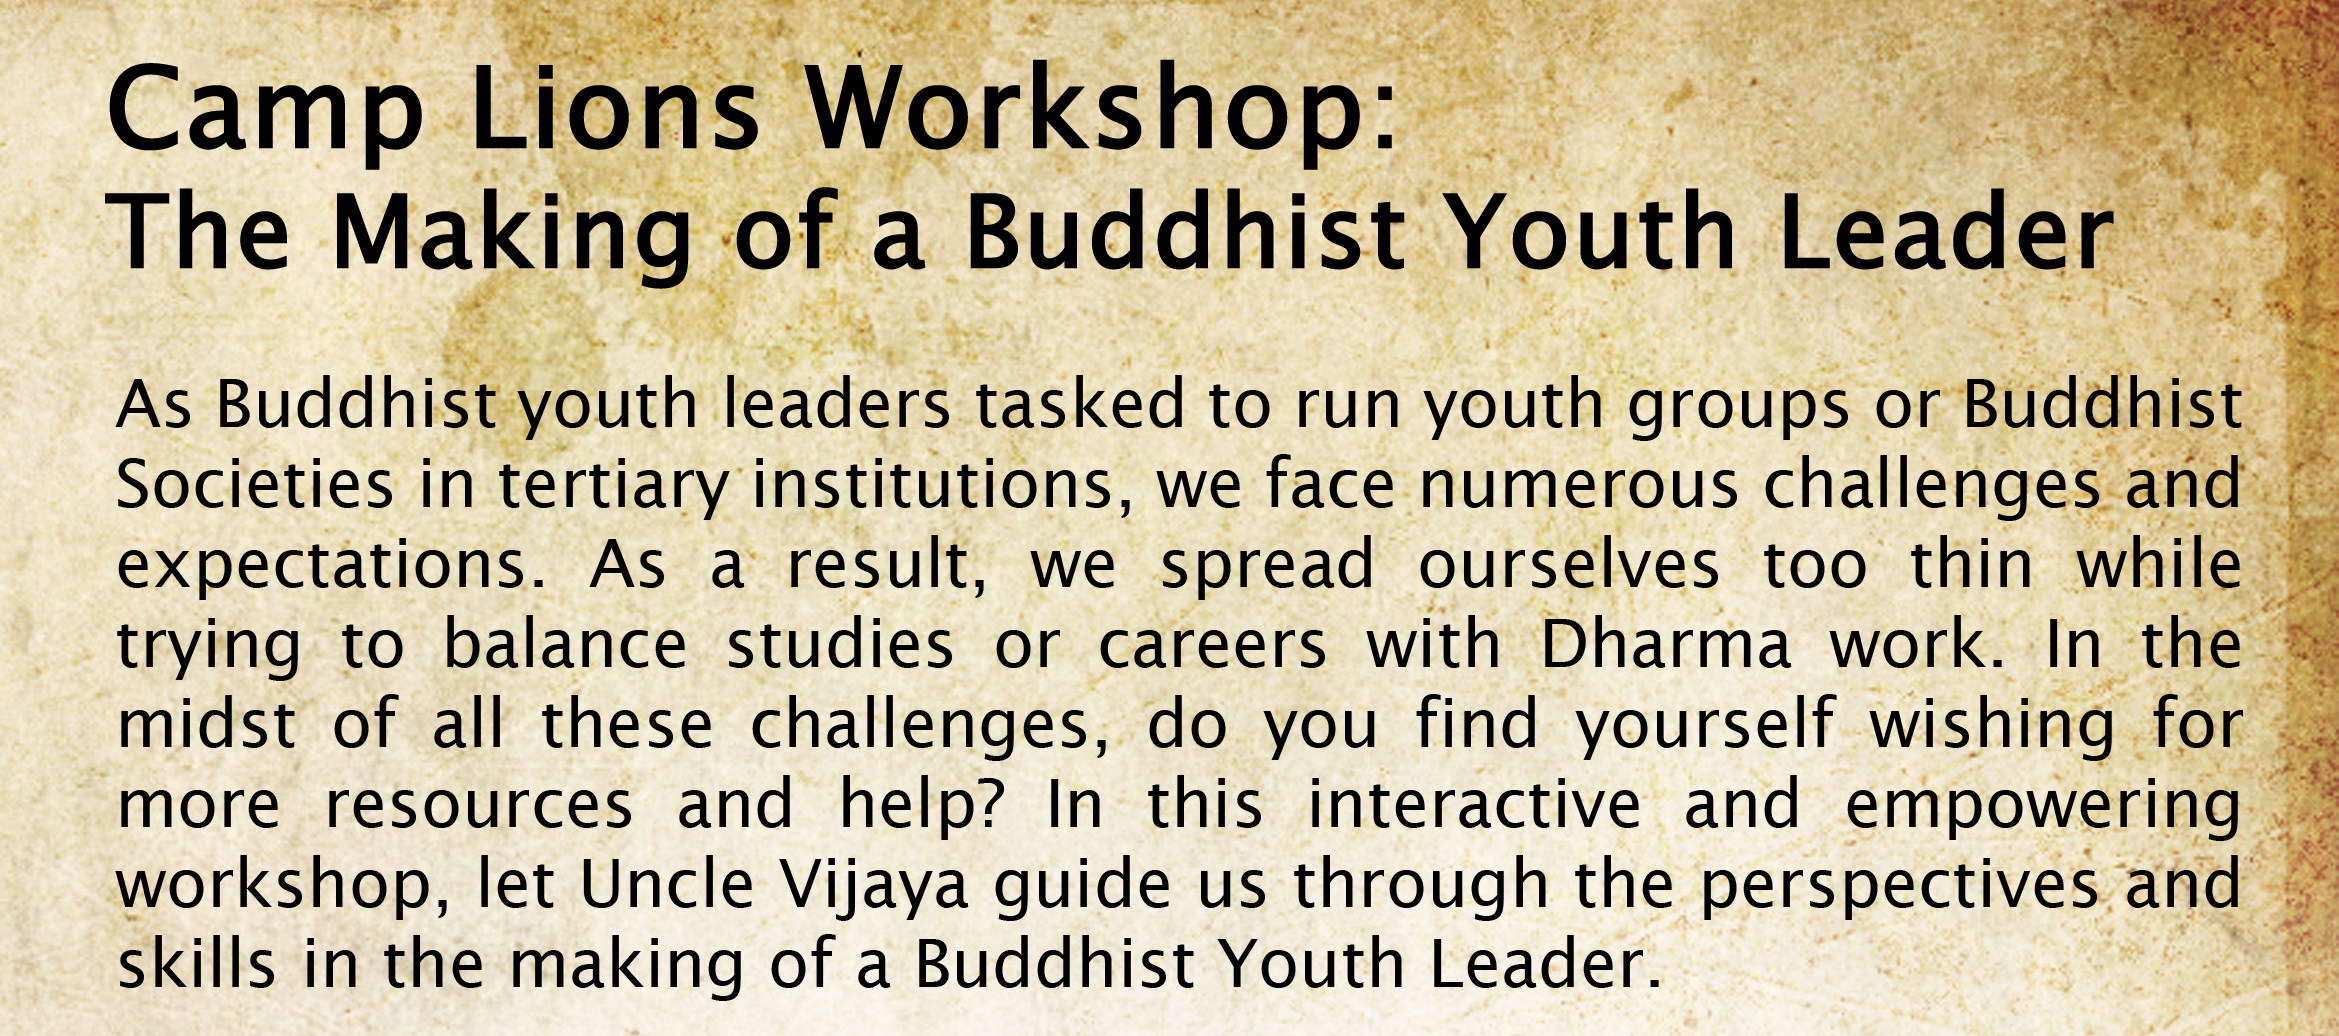 Camp Lions Workshop: The Making of a Buddhist Youth Leader